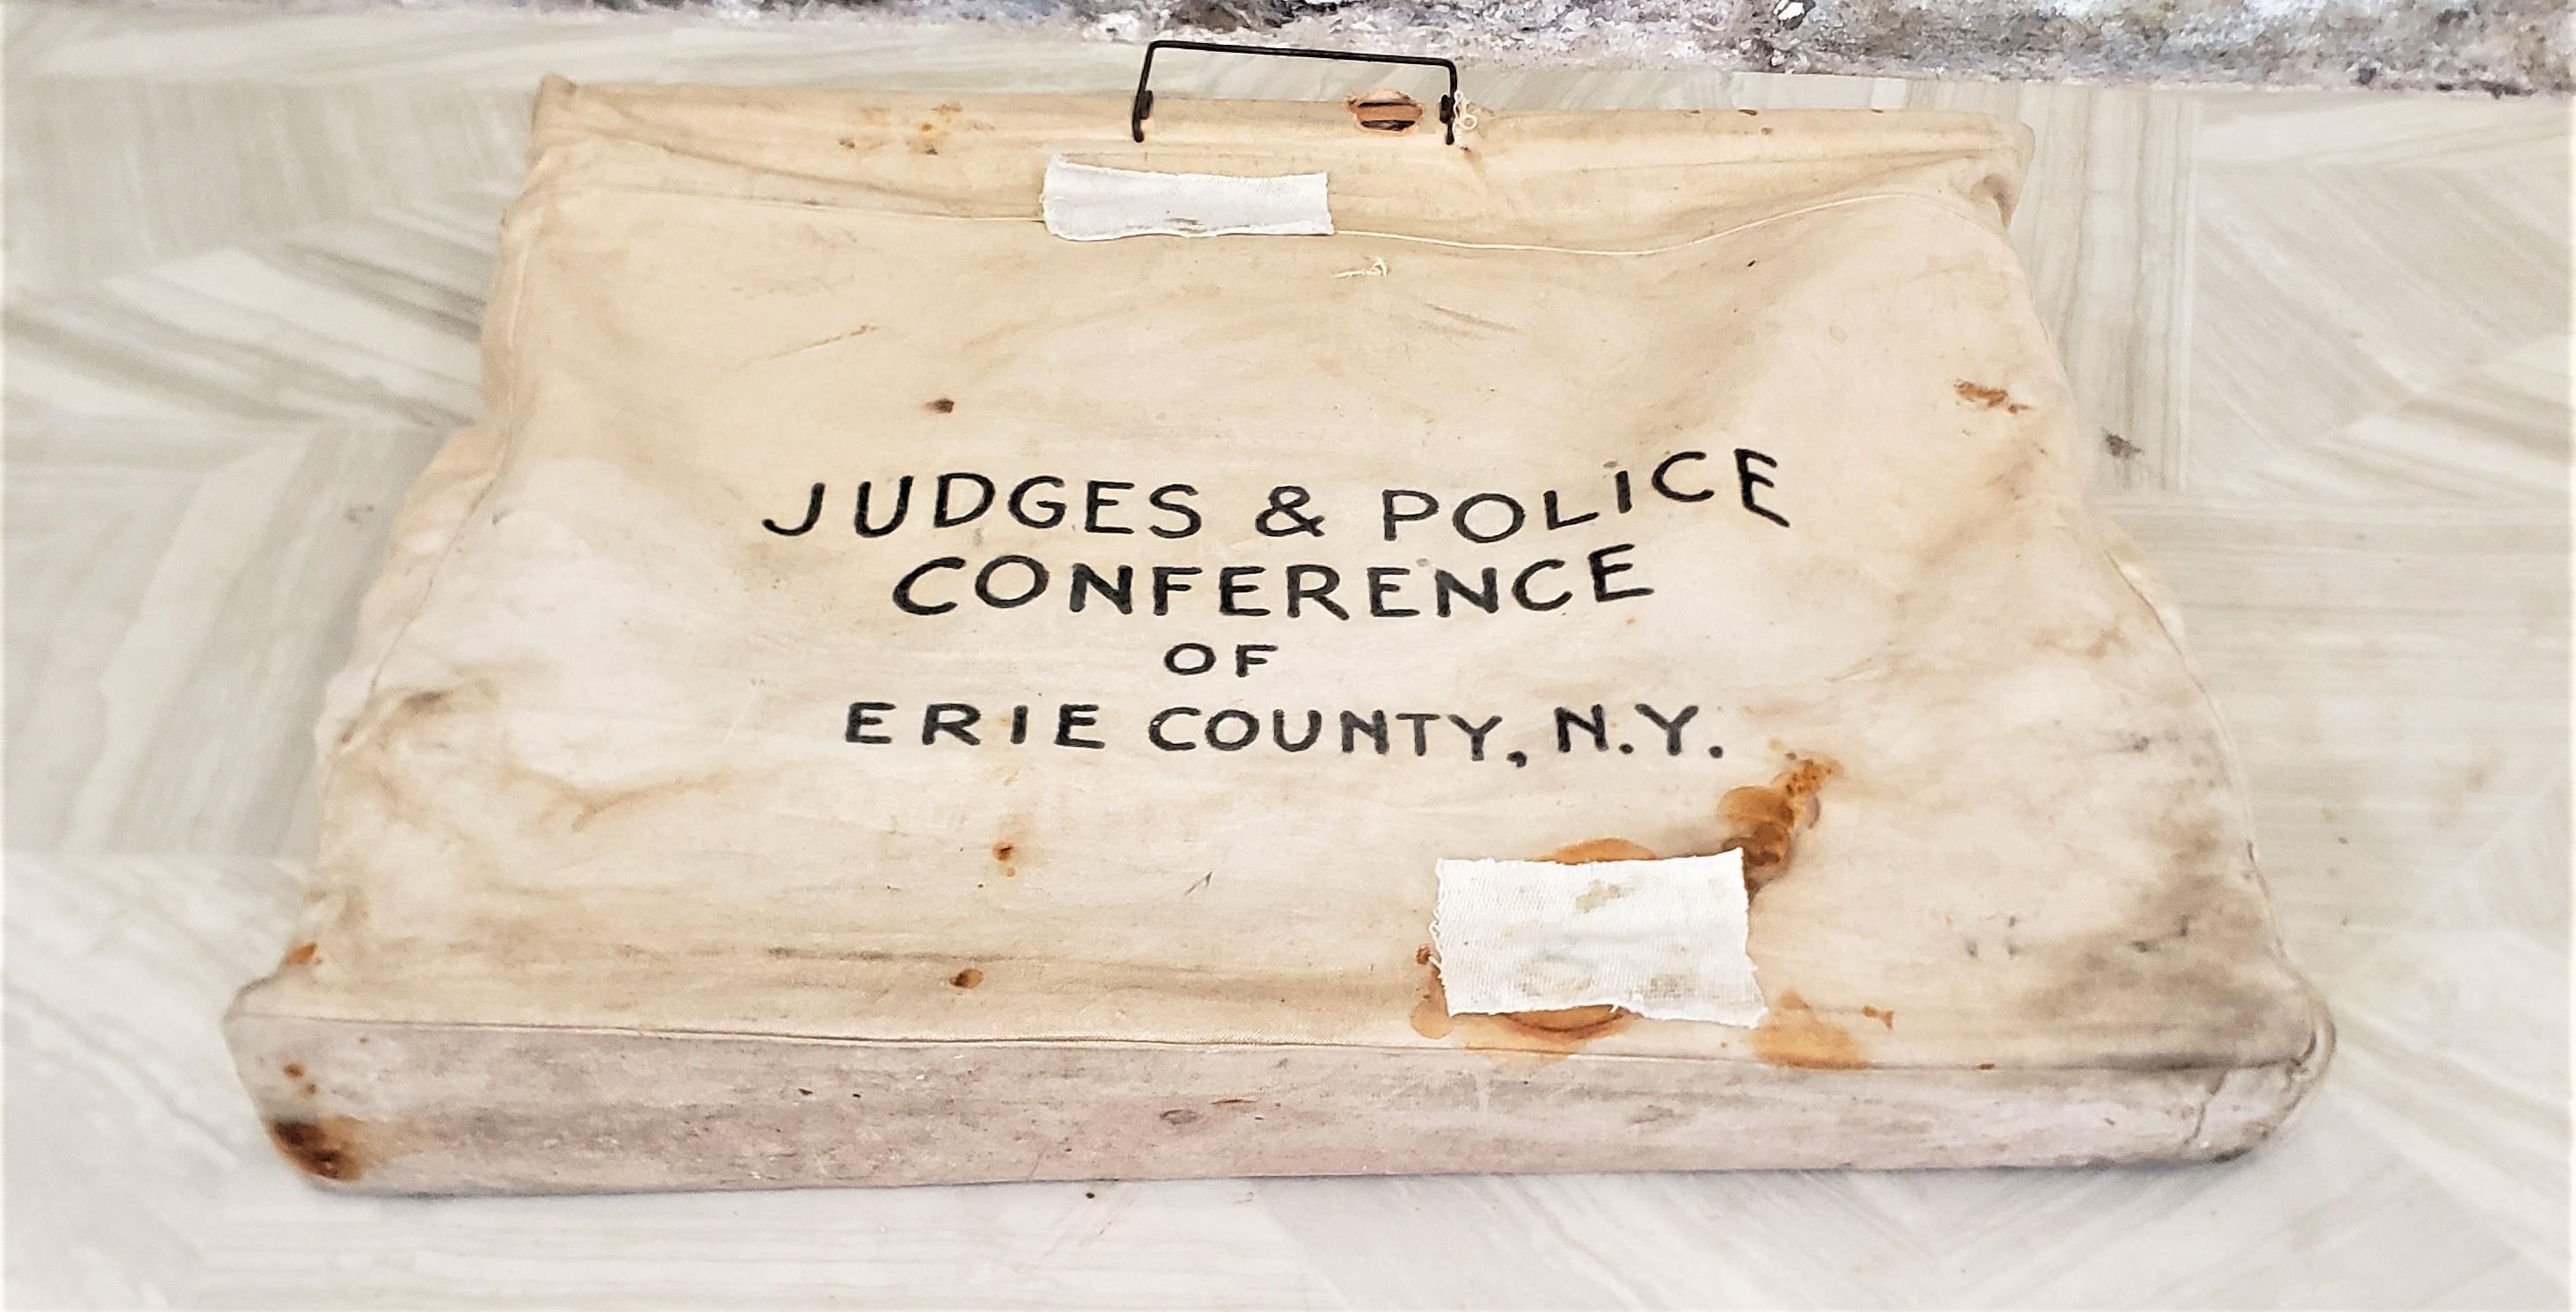 Erie County New York Judges & Police Conference Portable Lecturn or Podium & Bag For Sale 6